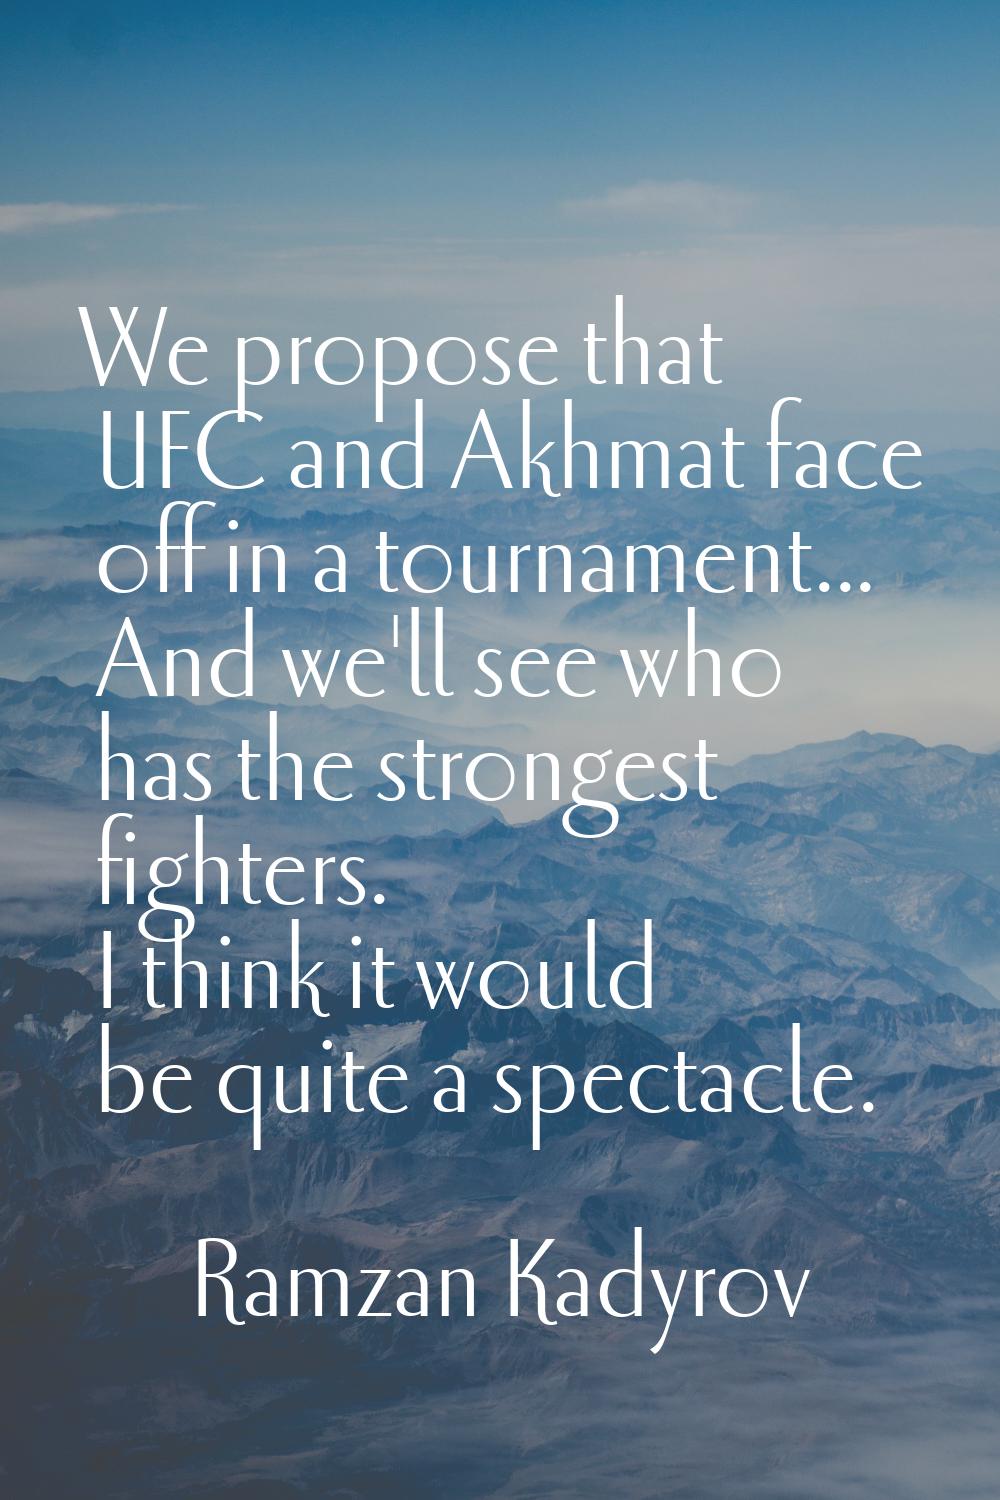 We propose that UFC and Akhmat face off in a tournament... And we'll see who has the strongest figh